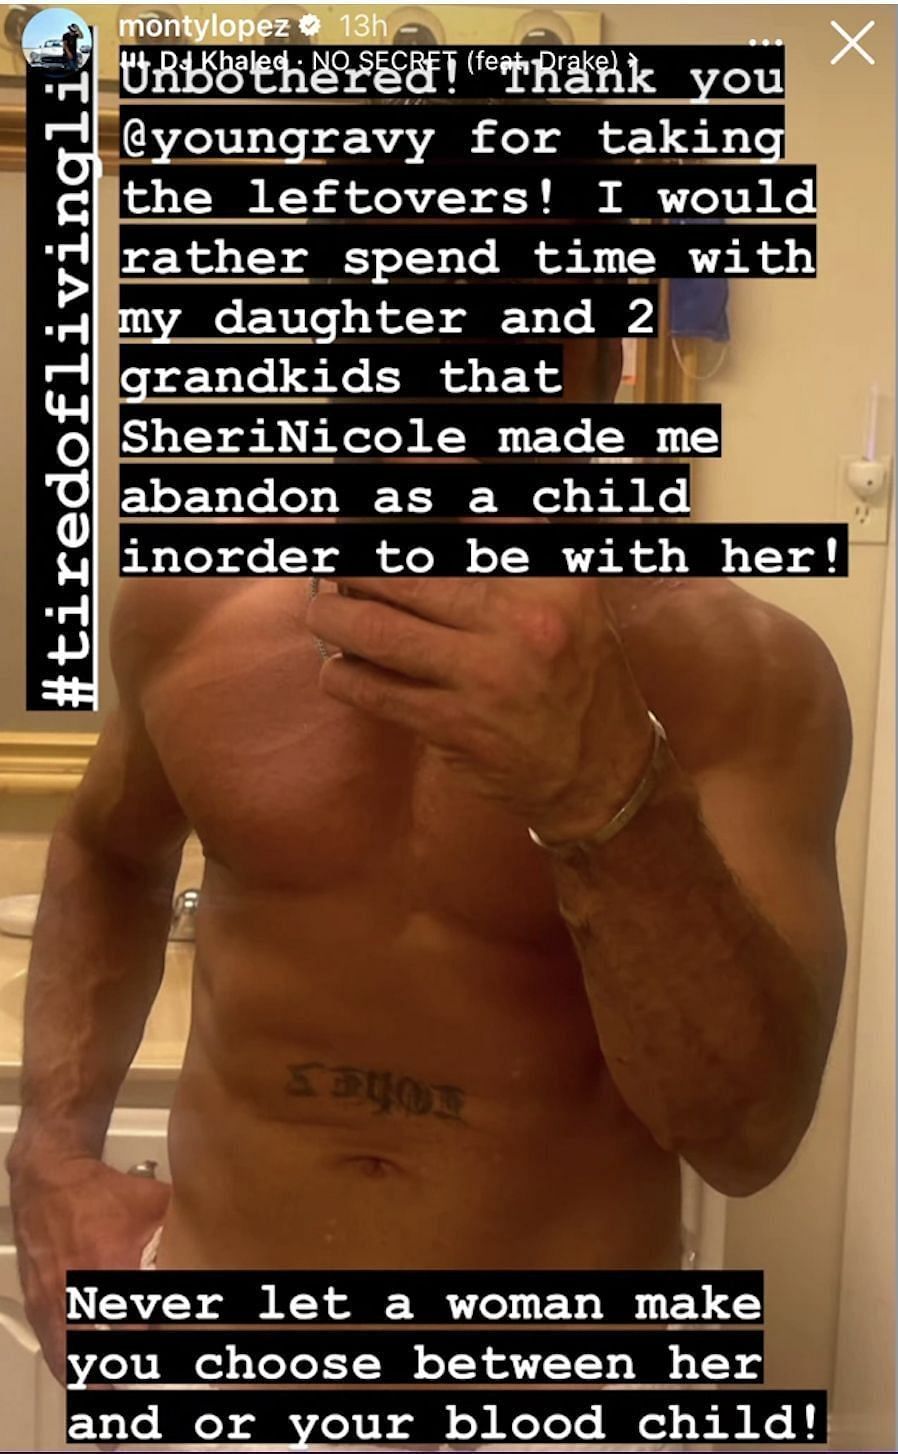 Monty Lopez calls ex-wife Sheri Nicole &quot;Leftovers&quot; in an Instagram story, claiming he is &quot;unbothered&quot; by the two being together. (Image via Monty Lopez/Instagram)